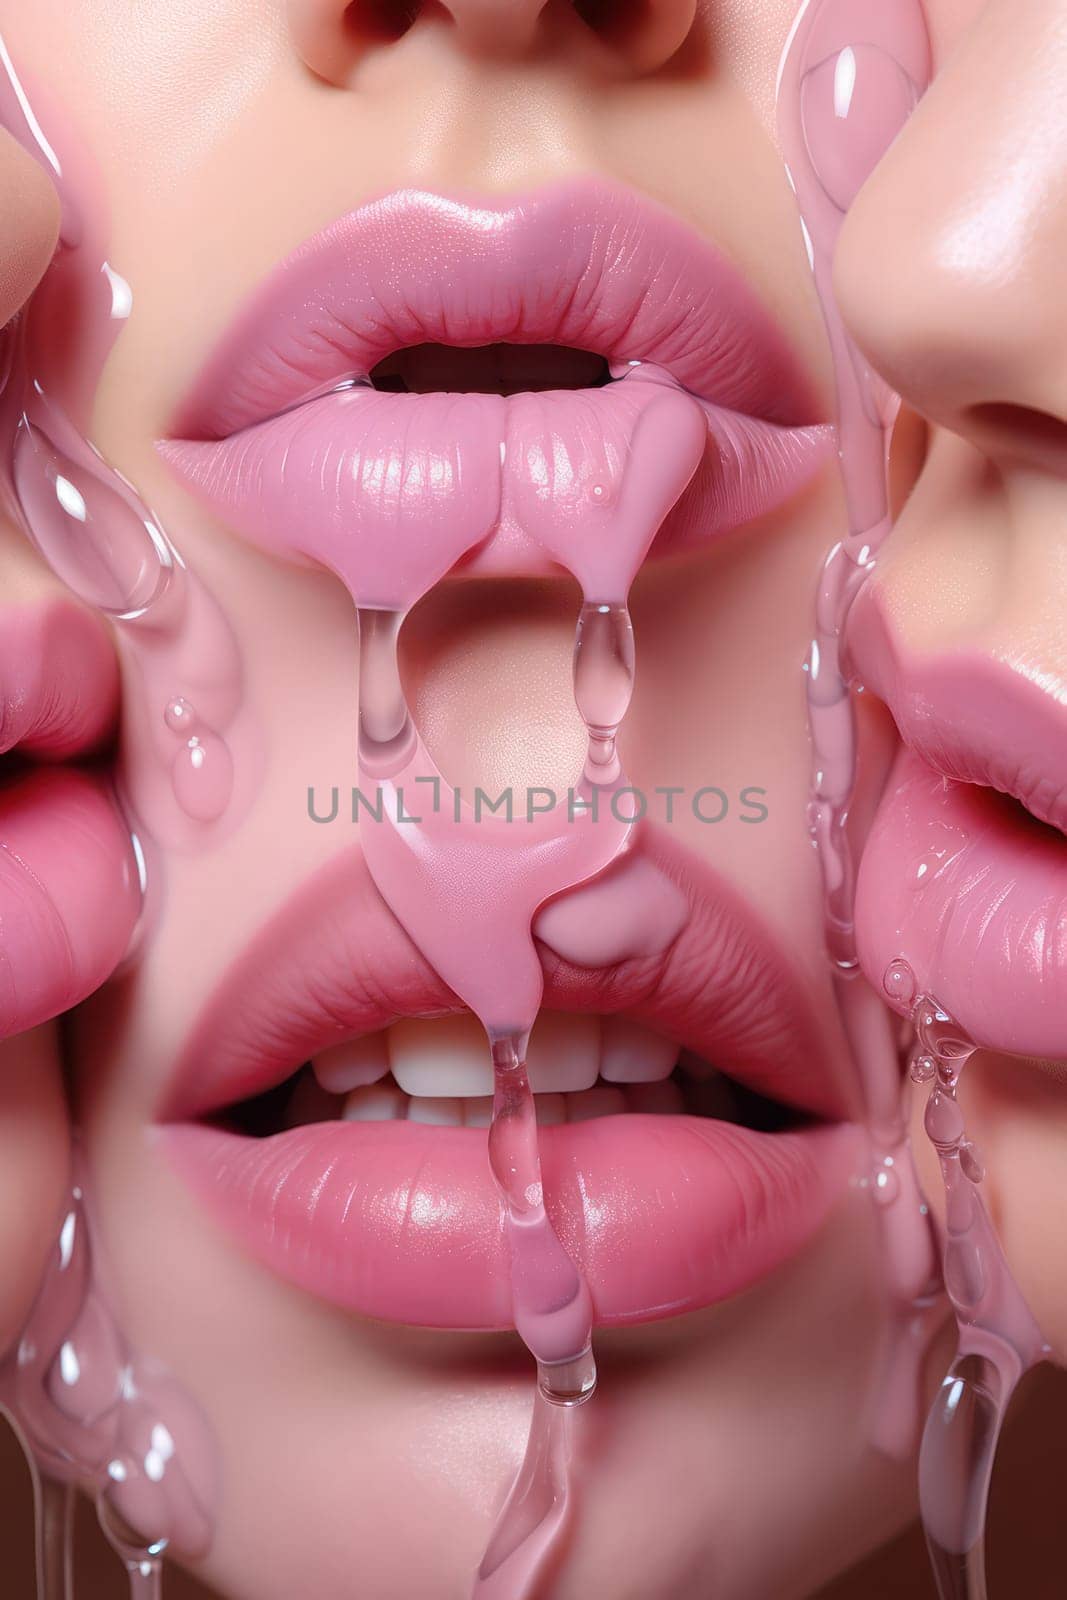 Glossy Temptation: A Sensual Close-up of a Woman's Shiny Red Lips with Dripping Lipgloss on a White Background